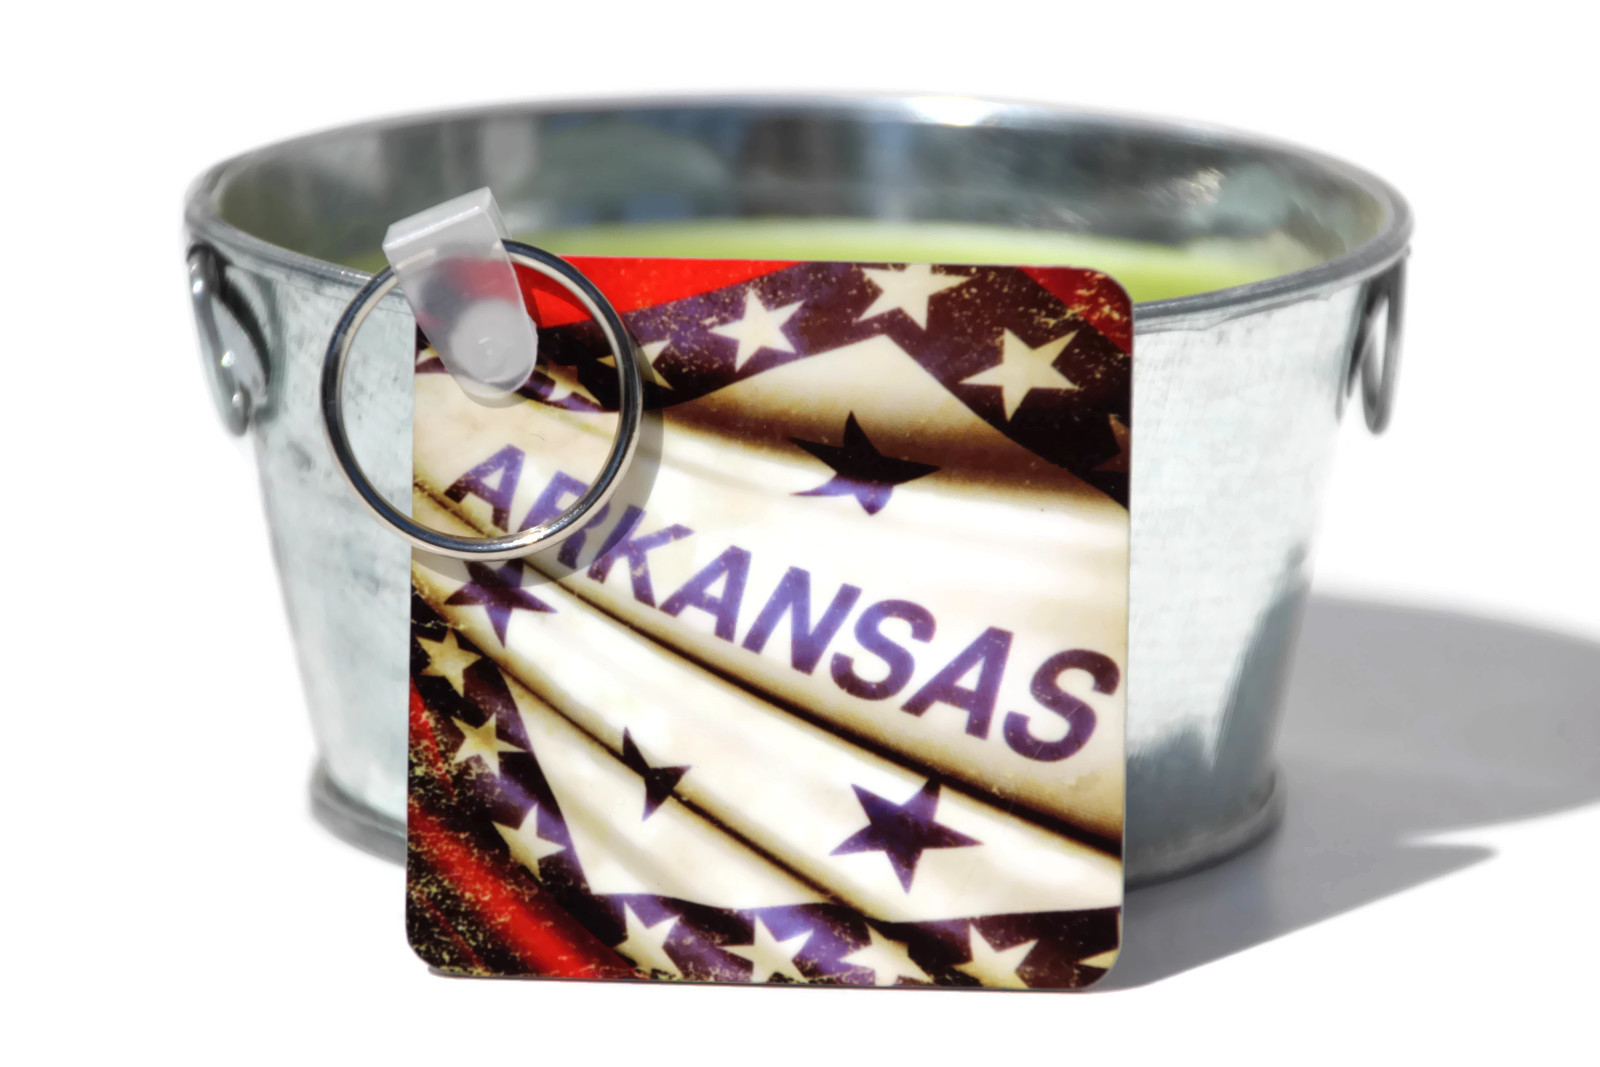 Arkansas Keychain made with sublimation printing